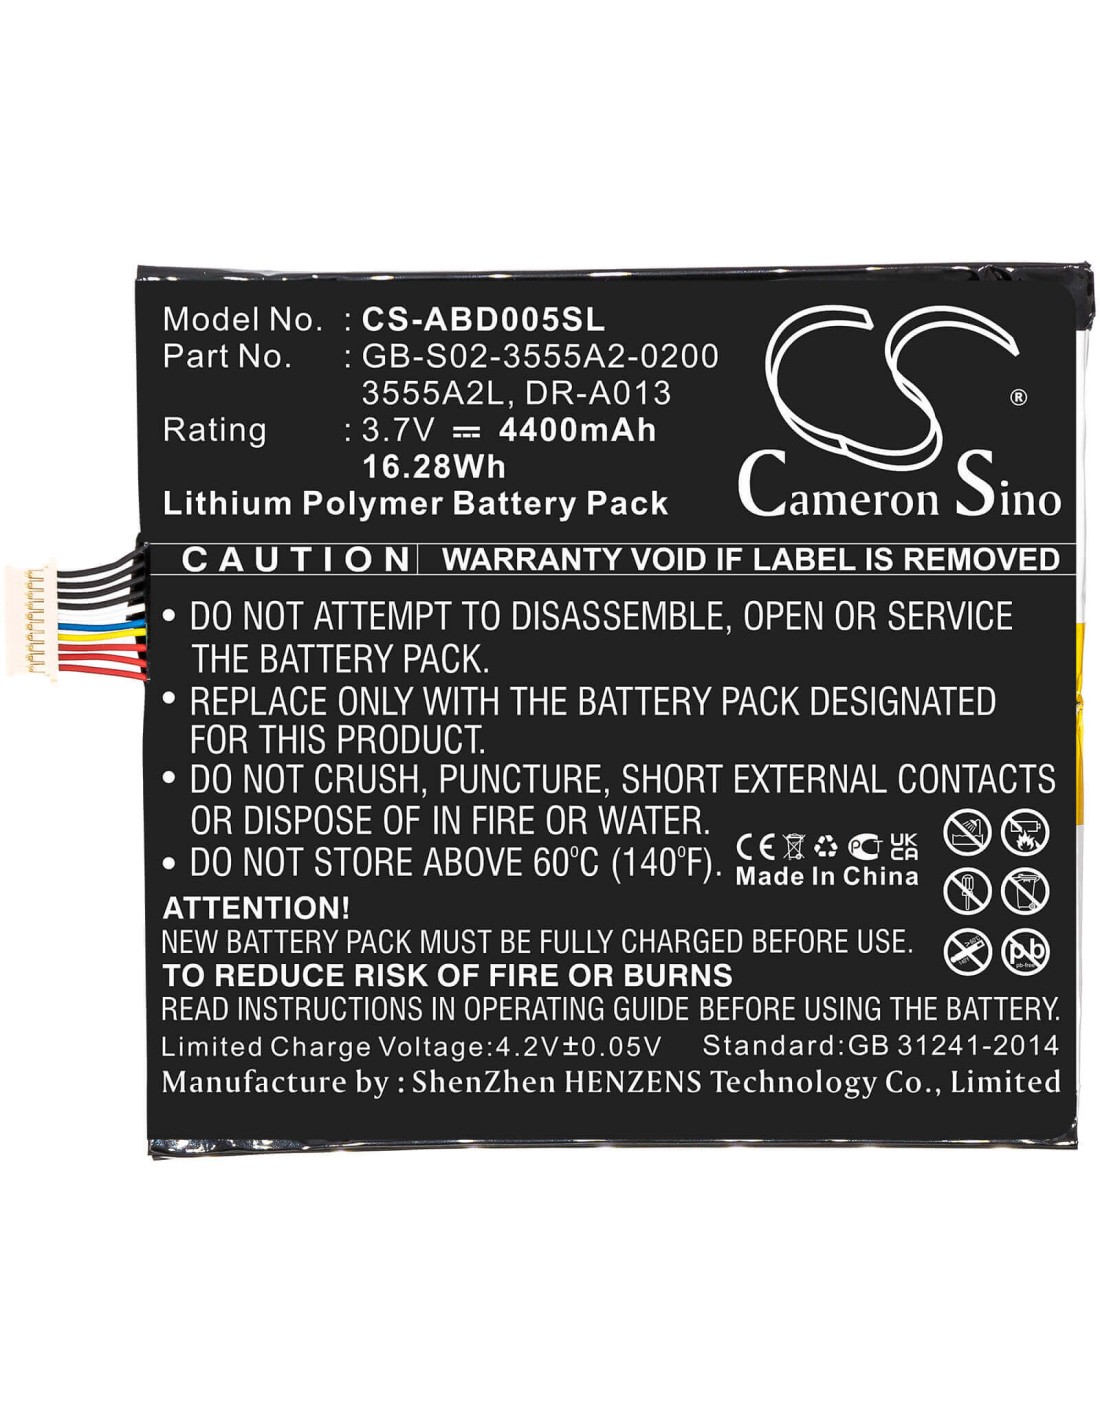 Battery for Amazon Kindle Fire, D01400 3.7V, 4400mAh - 16.28Wh